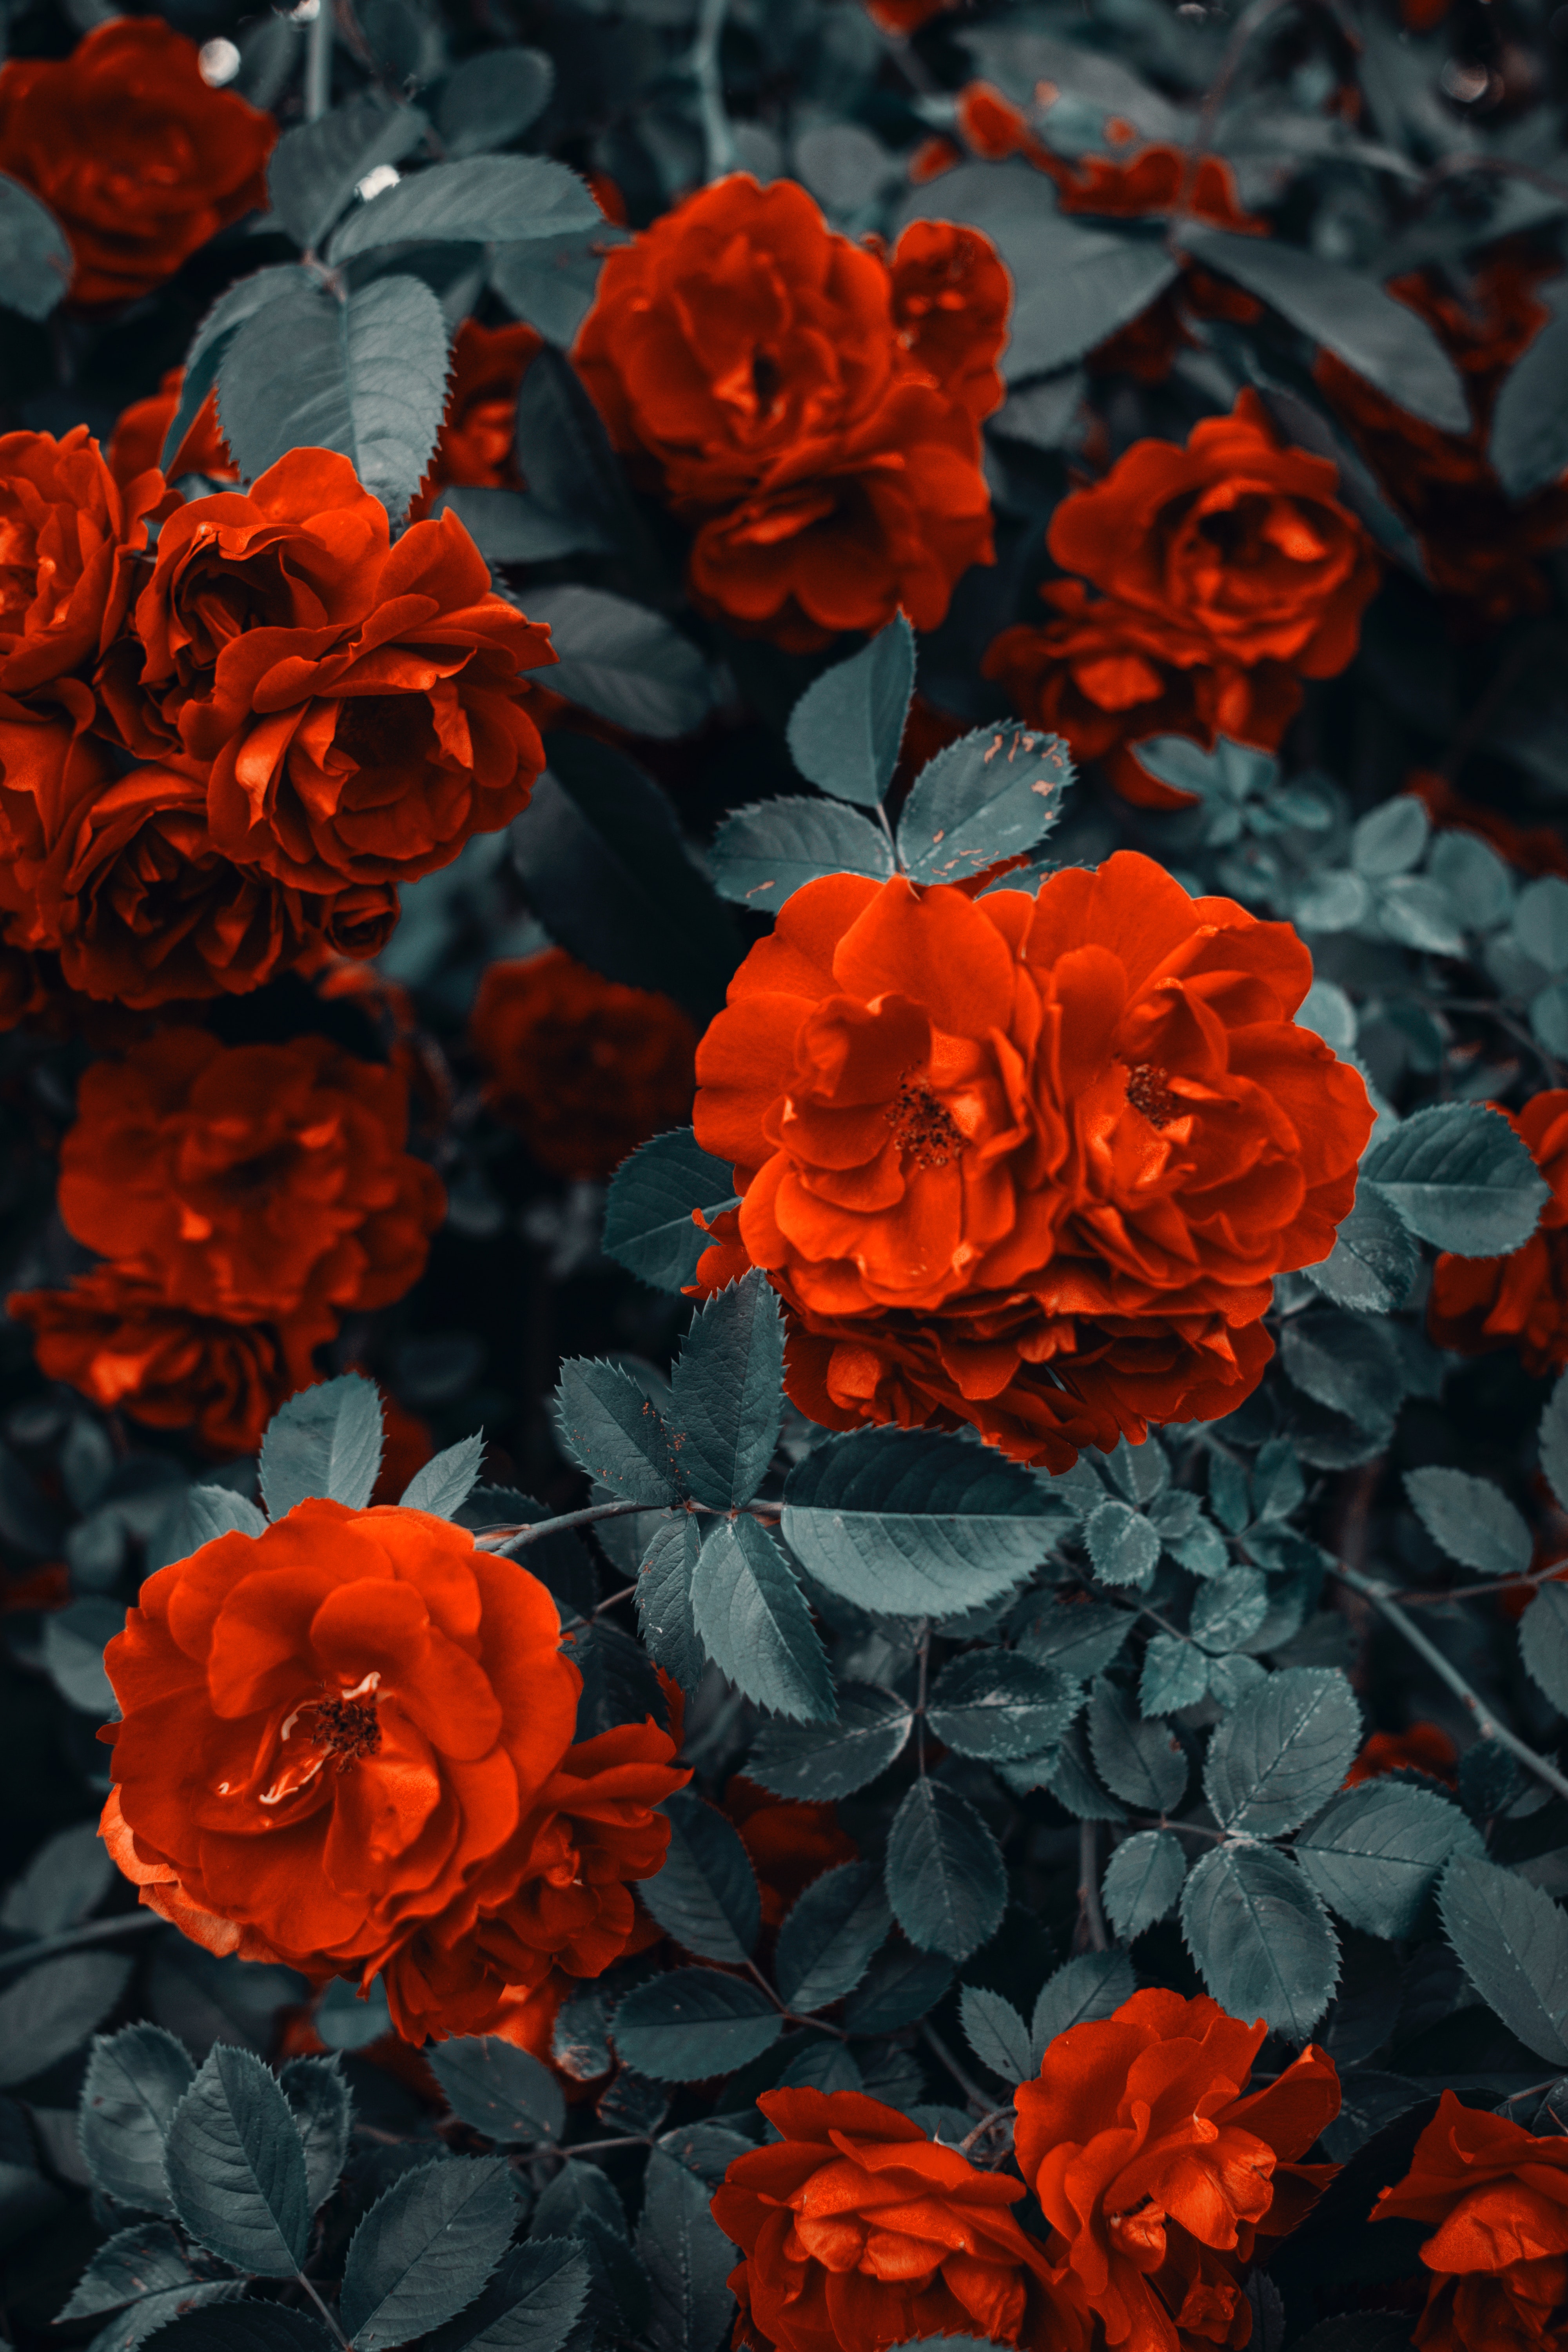 Roses Bush Flowers Buds Red - Hd Flower Wallpaper Iphone X , HD Wallpaper & Backgrounds